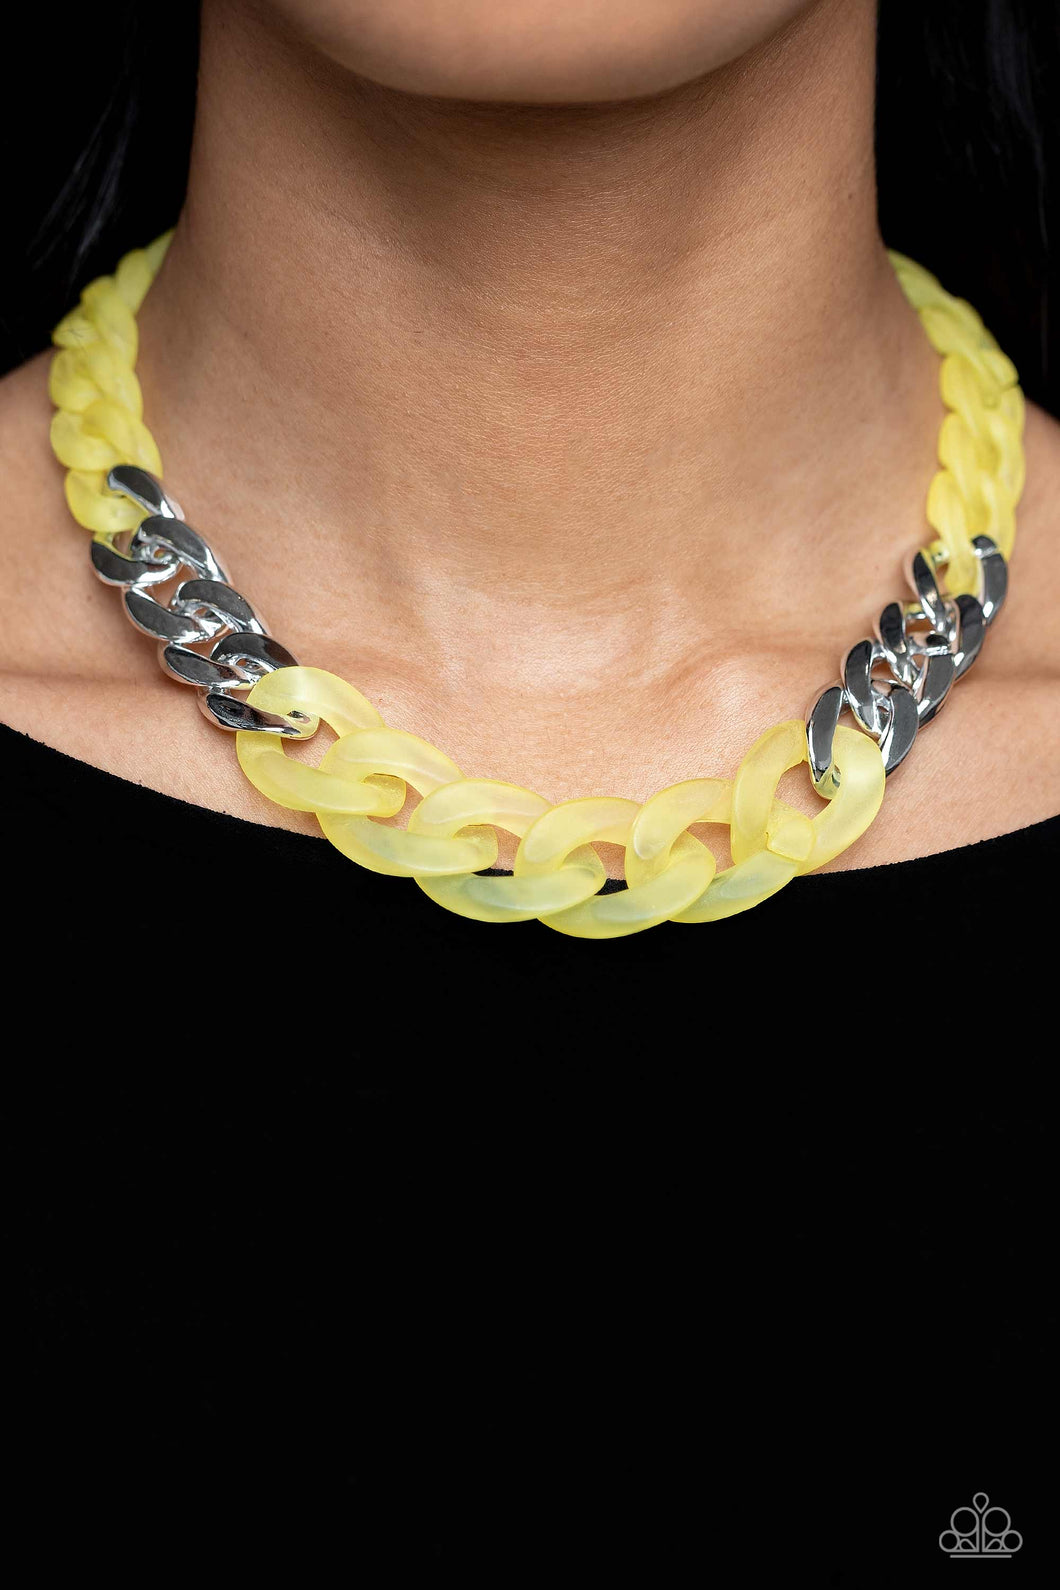 Paparazzi Curb Your Enthusiasm - Yellow Necklace